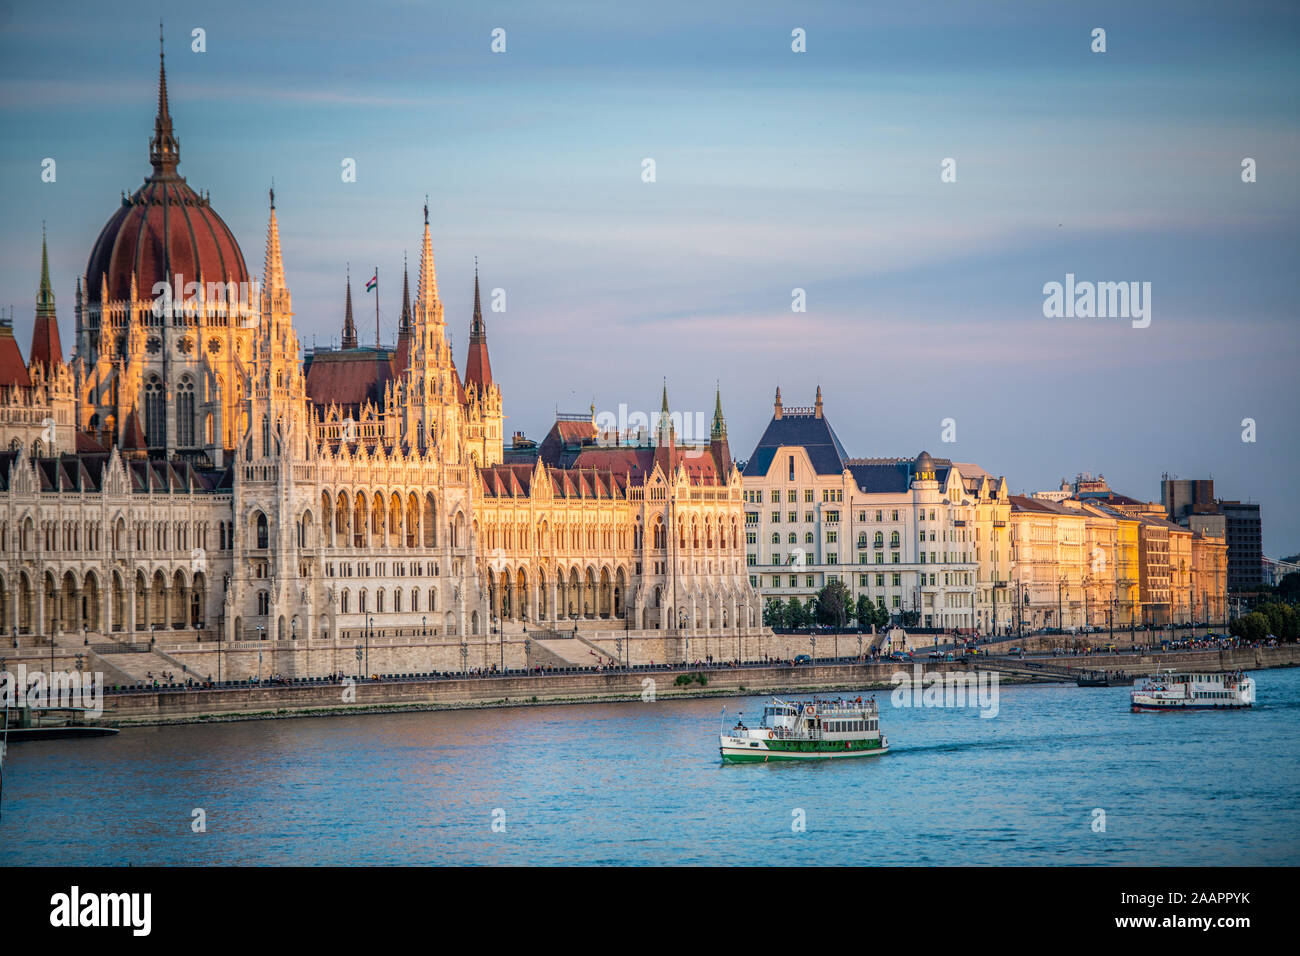 The Hungarian parliament building on the banks the Danube river, Budapest, Hungary. Stock Photo